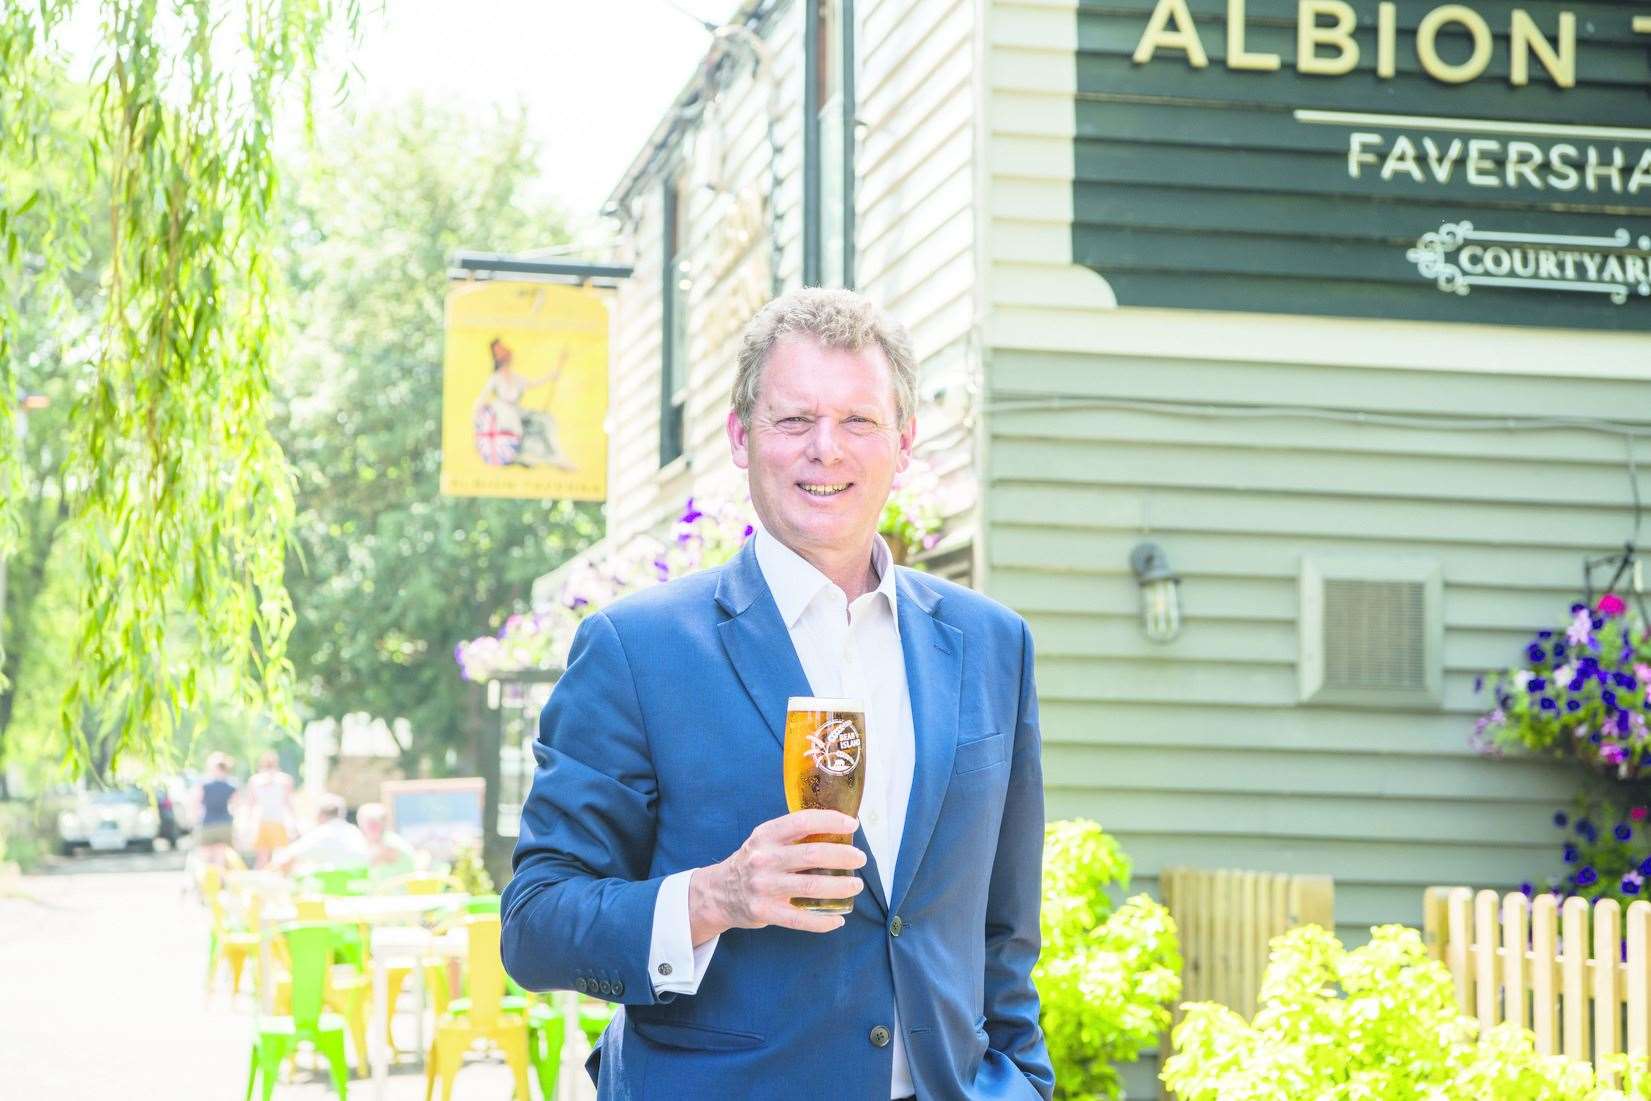 Shepherd Neame chief executive Jonathan Neame welcomed the Chancellor's announcement of a £1 billion fund for the hospitality and leisure sectors